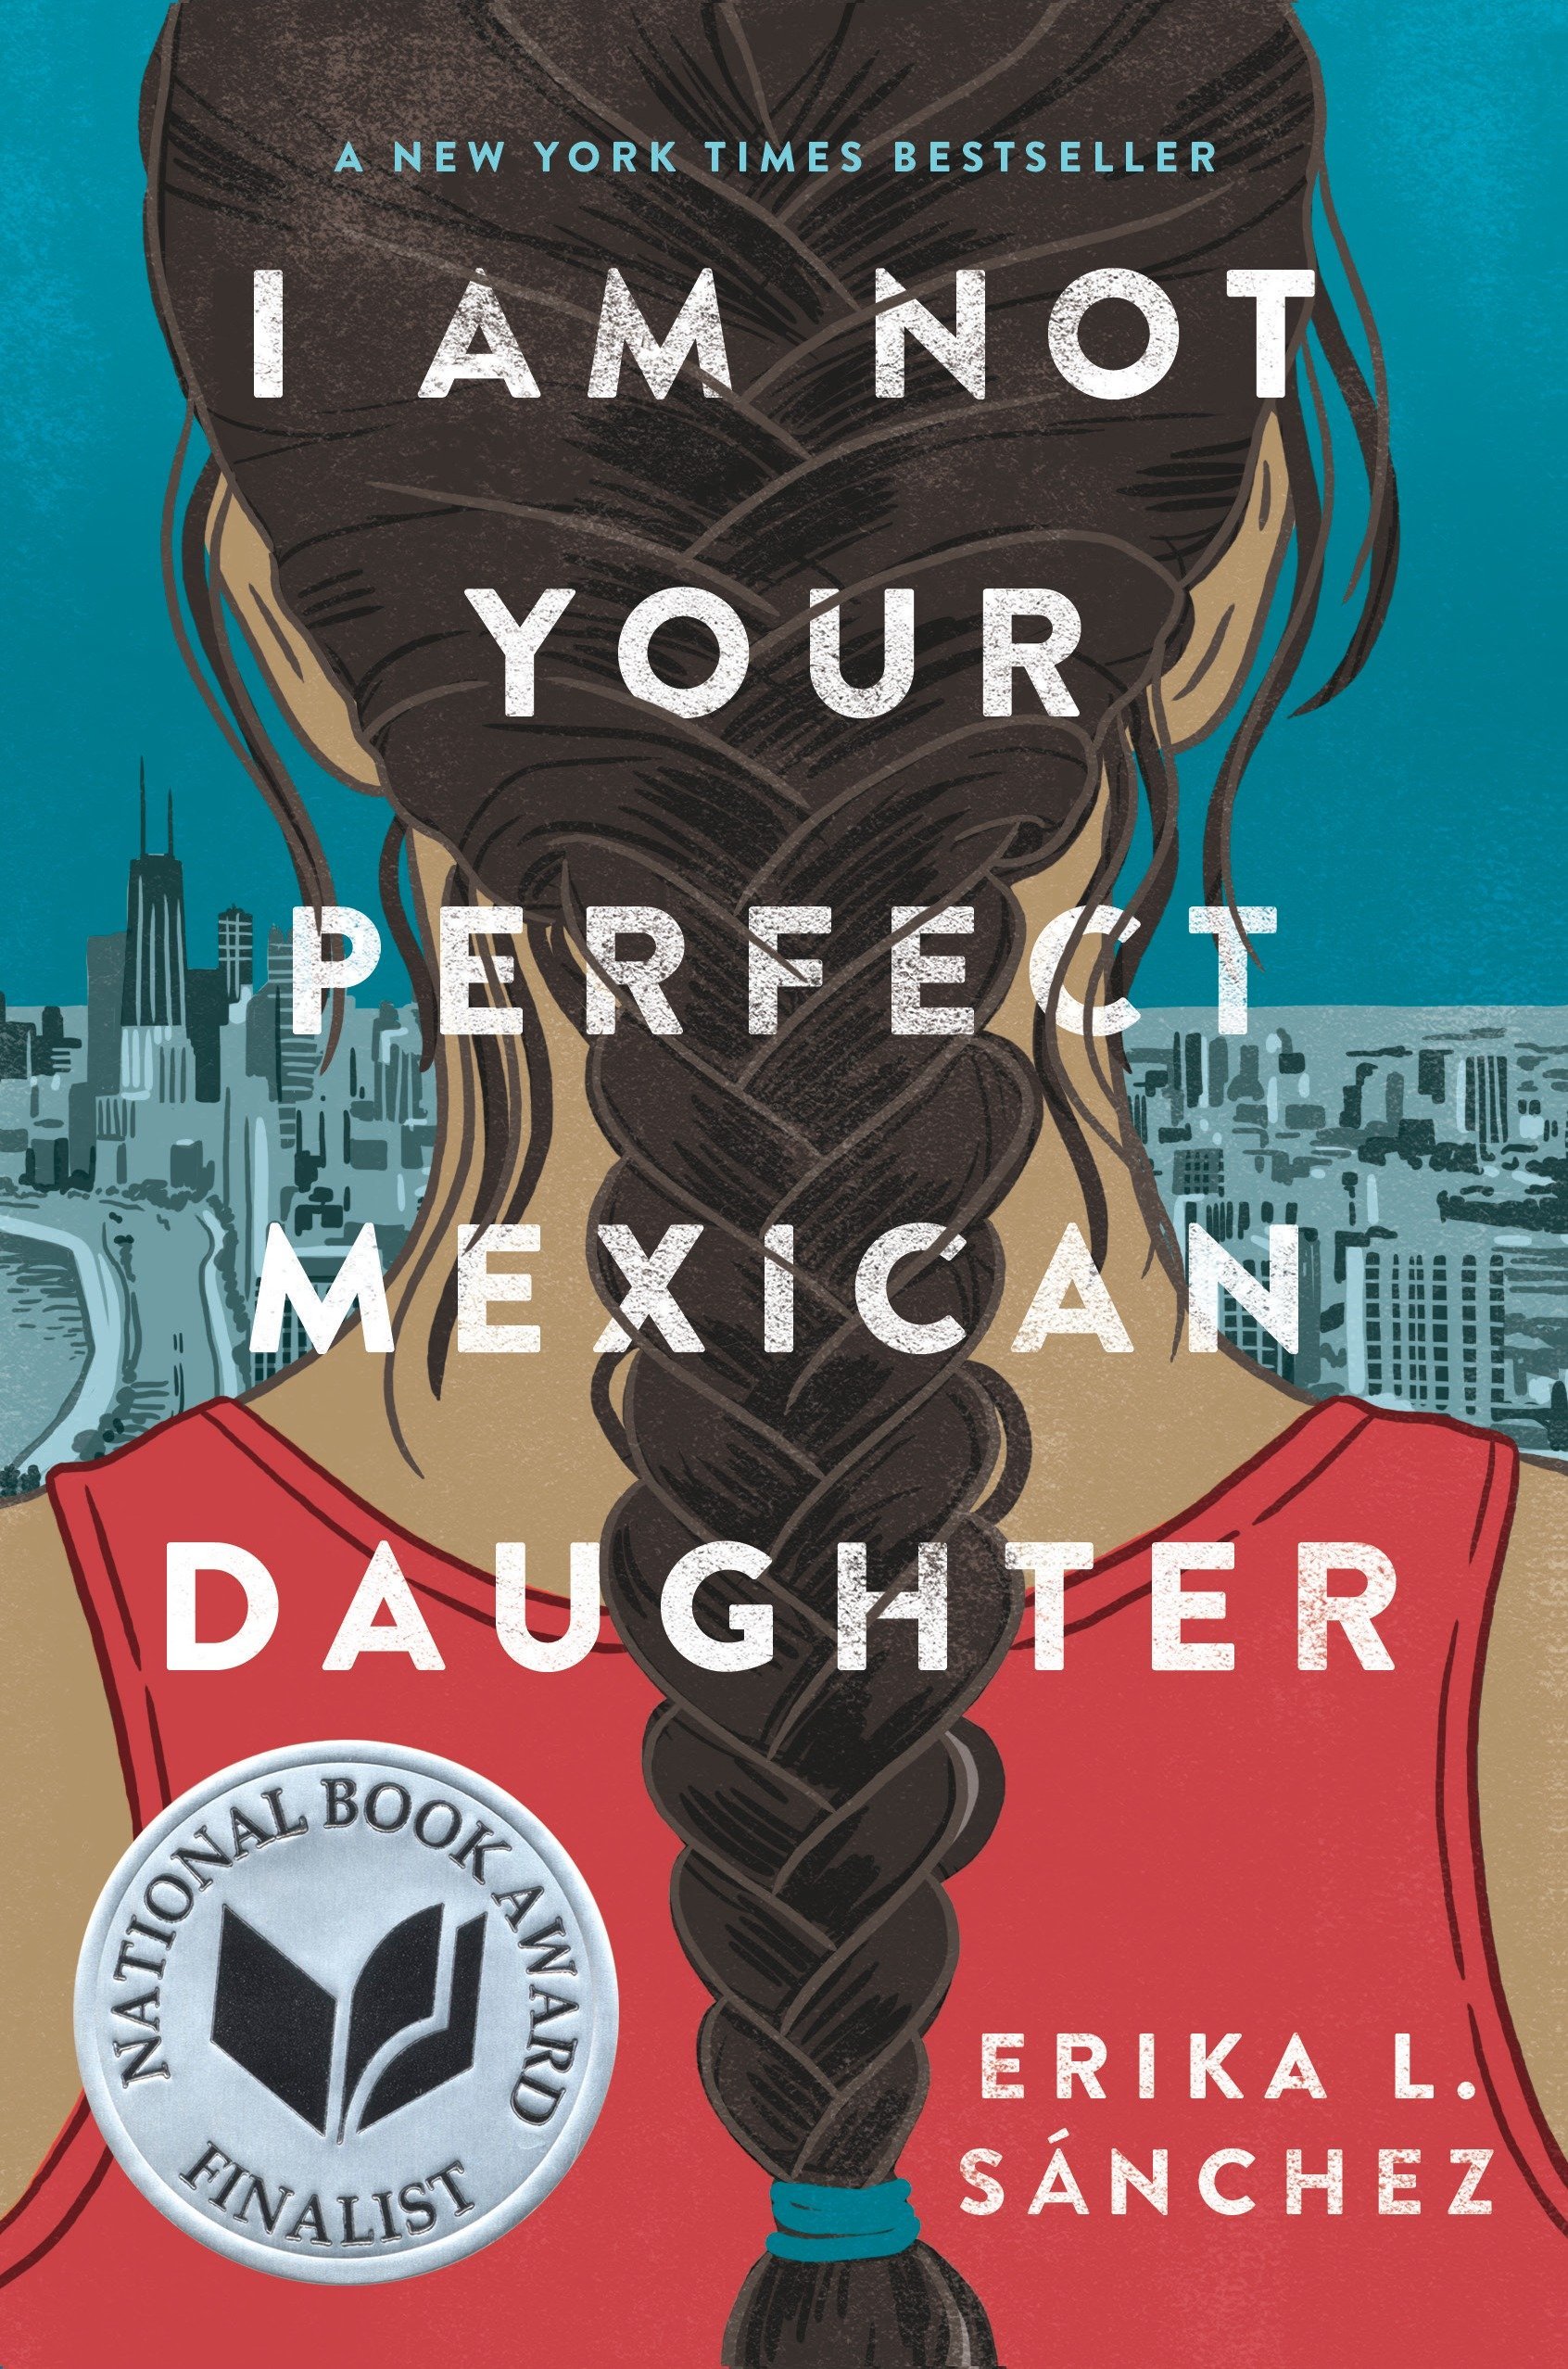 Erika L. Sanchez: I Am Not Your Perfect Mexican Daughter (2017, Alfred A Knopf Inc., an imprint of Random House Children's Books)